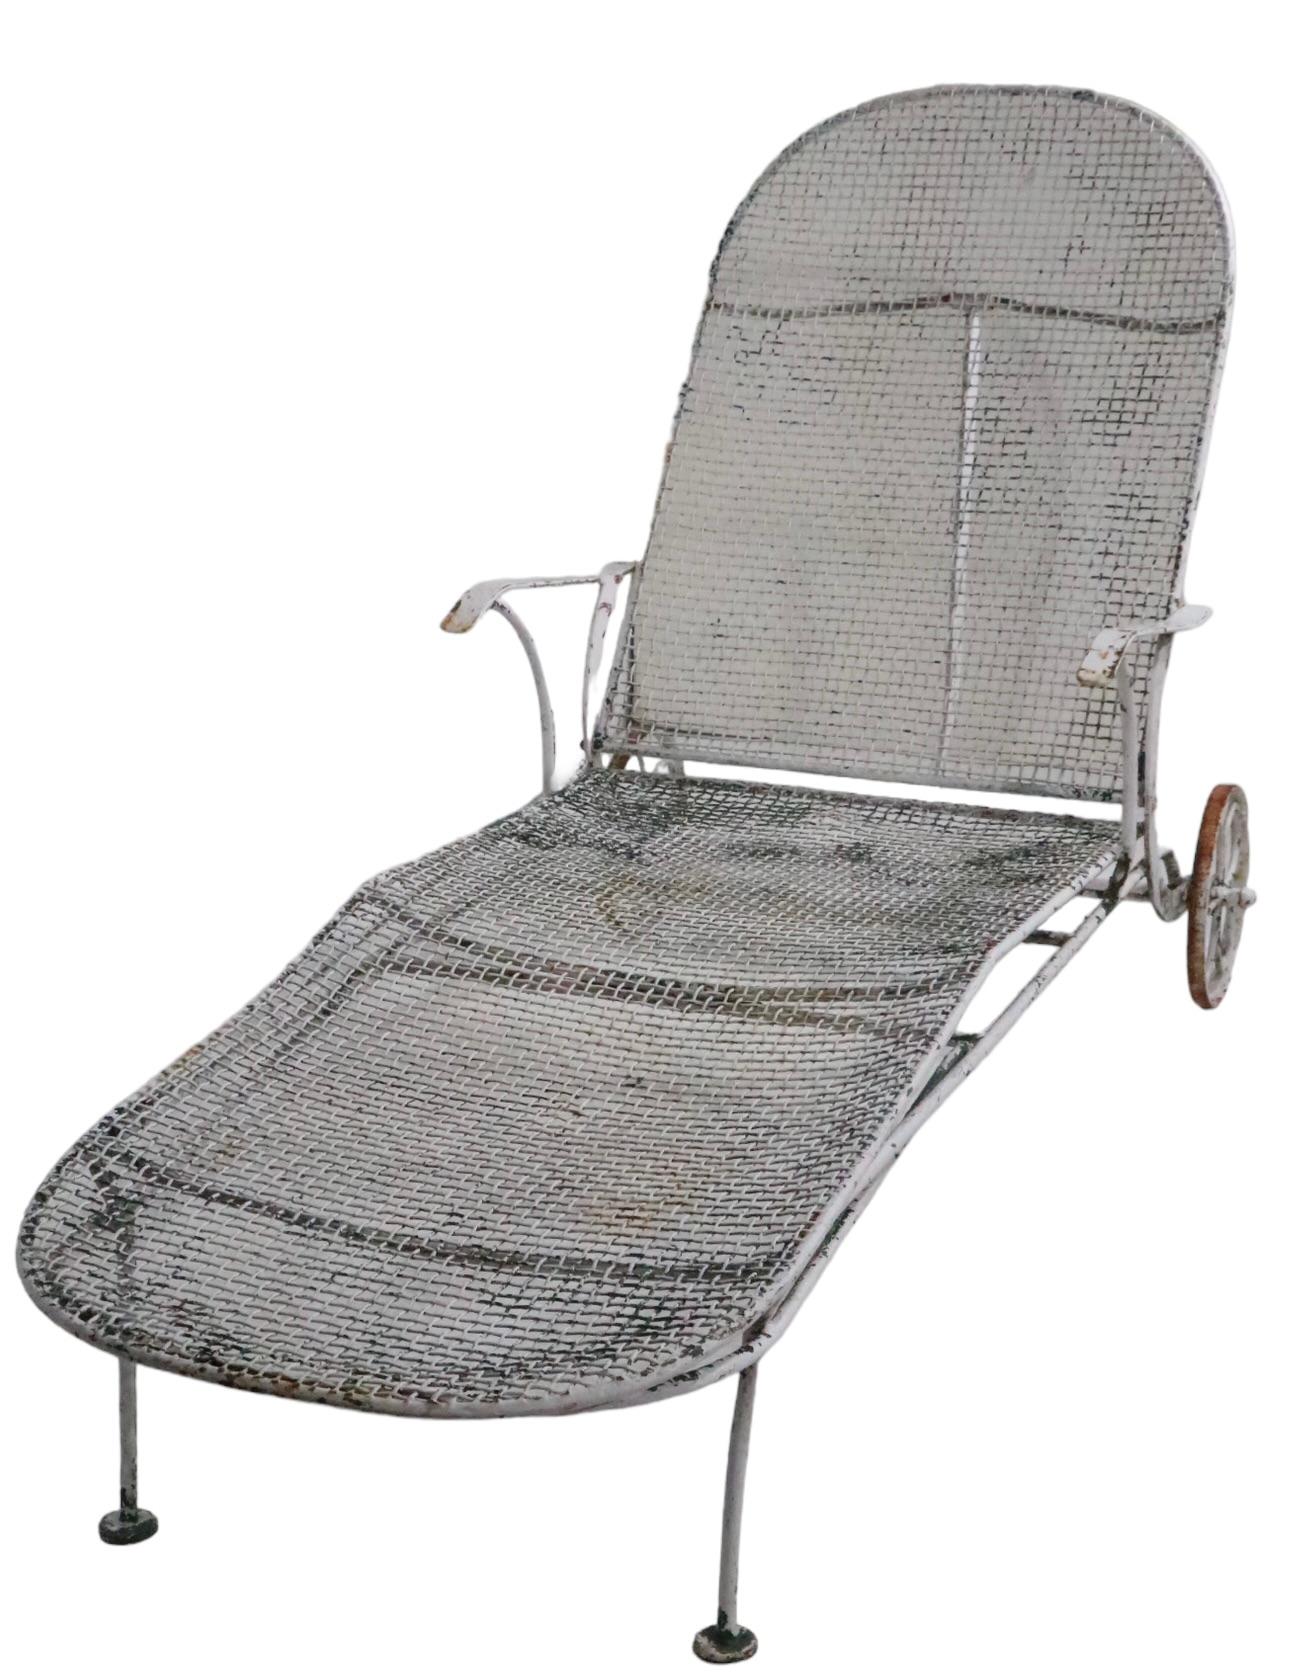  Wrought Iron Garden Poolside Patio Woodard Sculptura Chaise Lounge c. 1950's For Sale 4